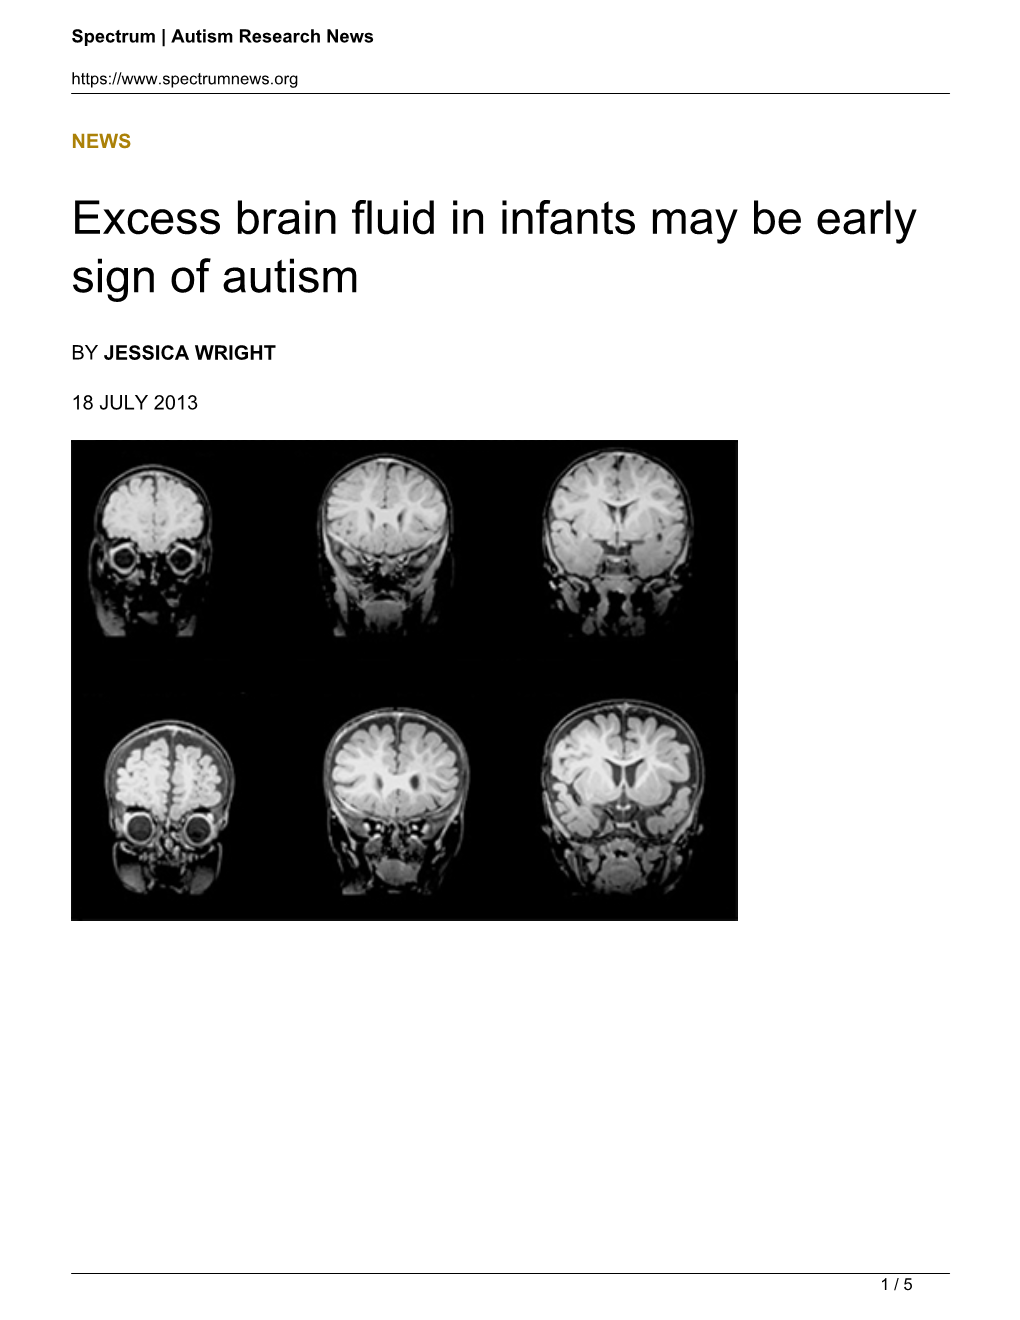 Excess Brain Fluid in Infants May Be Early Sign of Autism